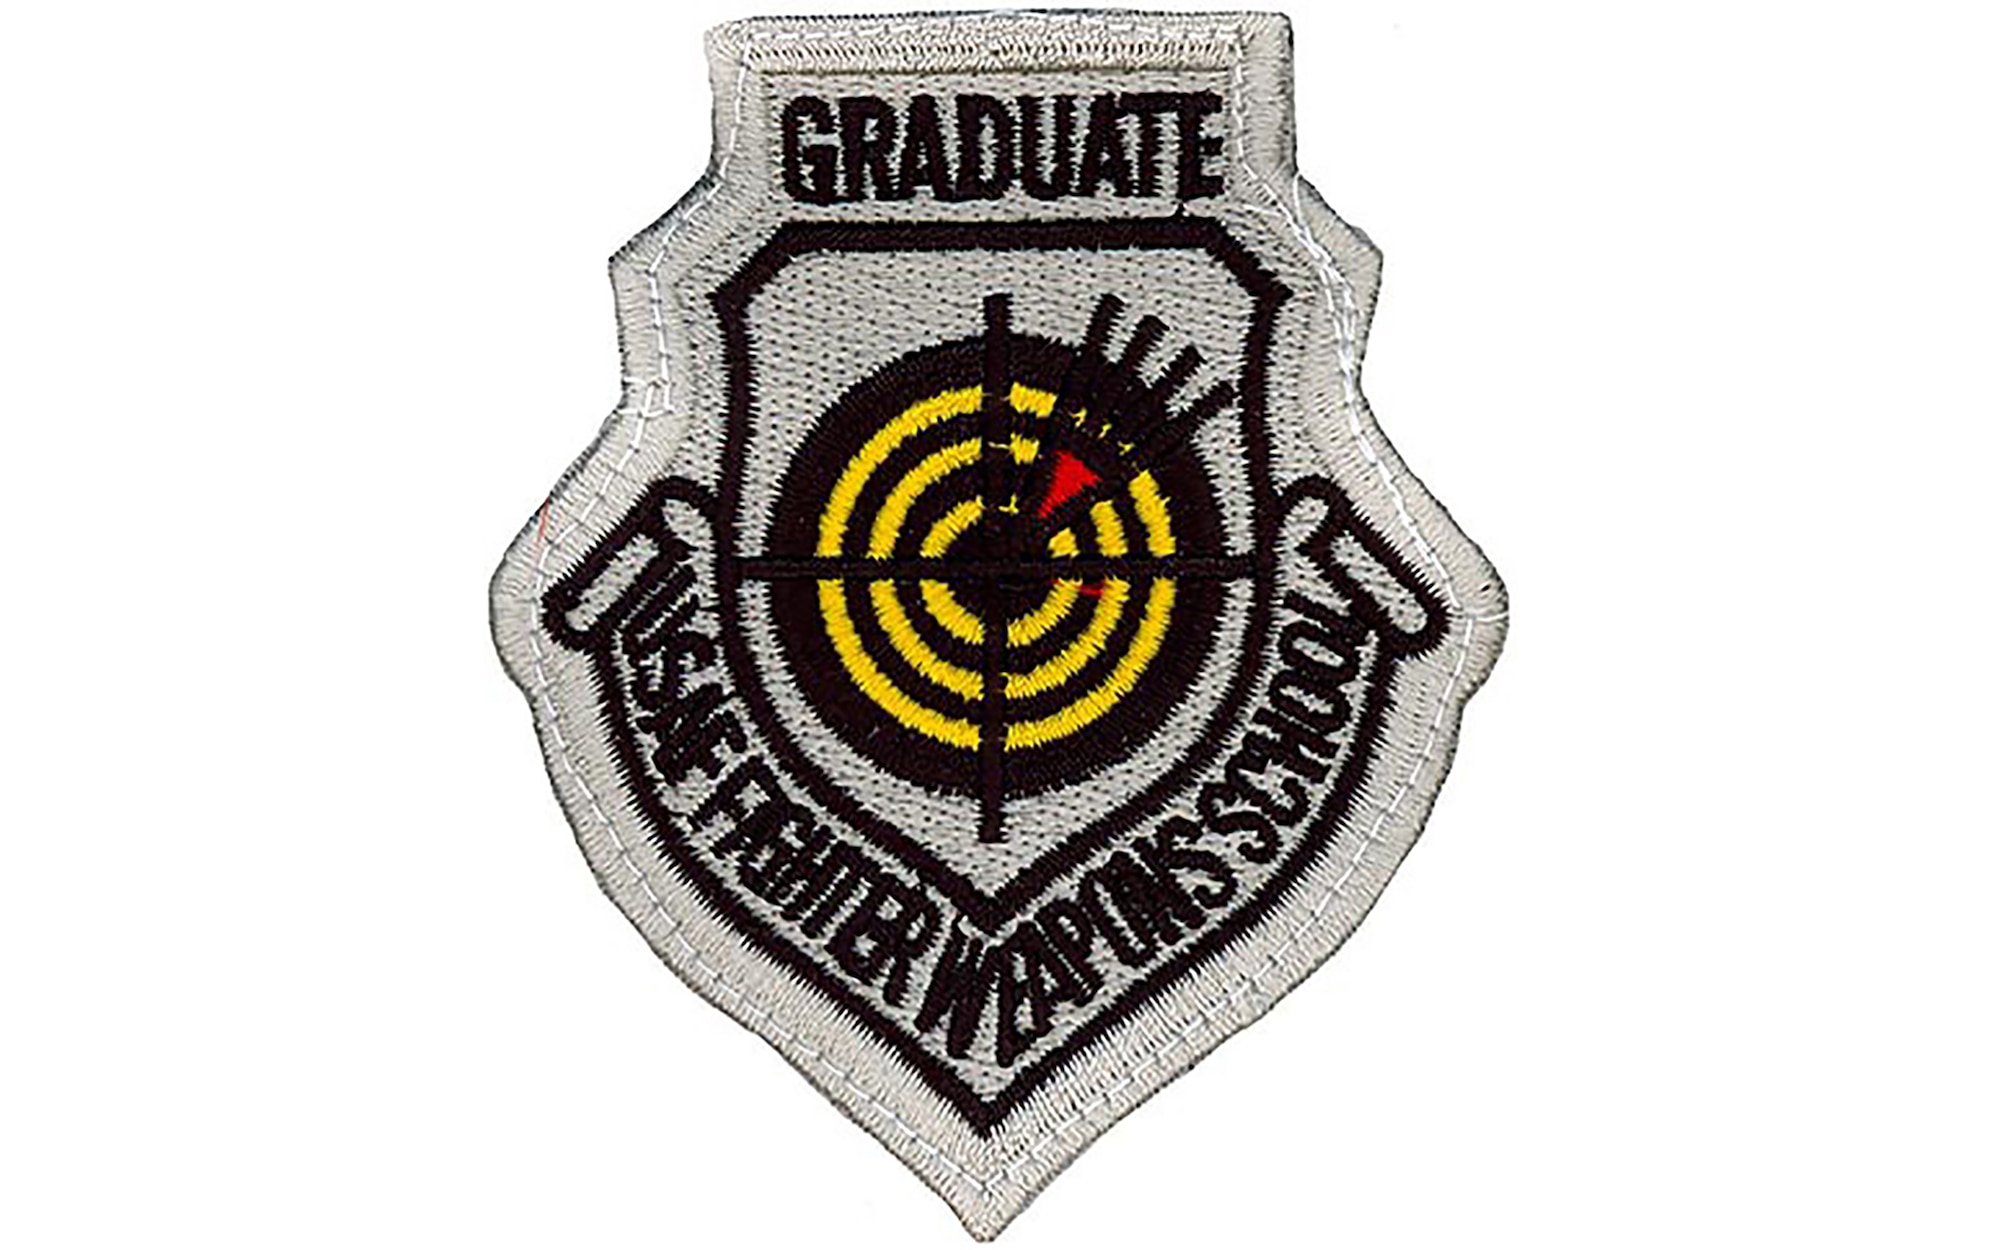 An image of a U.S. Air Force Fighter Weapons School Graduate patch after being scanned at the 177th Fighter Wing, New Jersey Air National Guard in Egg Harbor Township, New Jersey, Dec. 29, 2022.